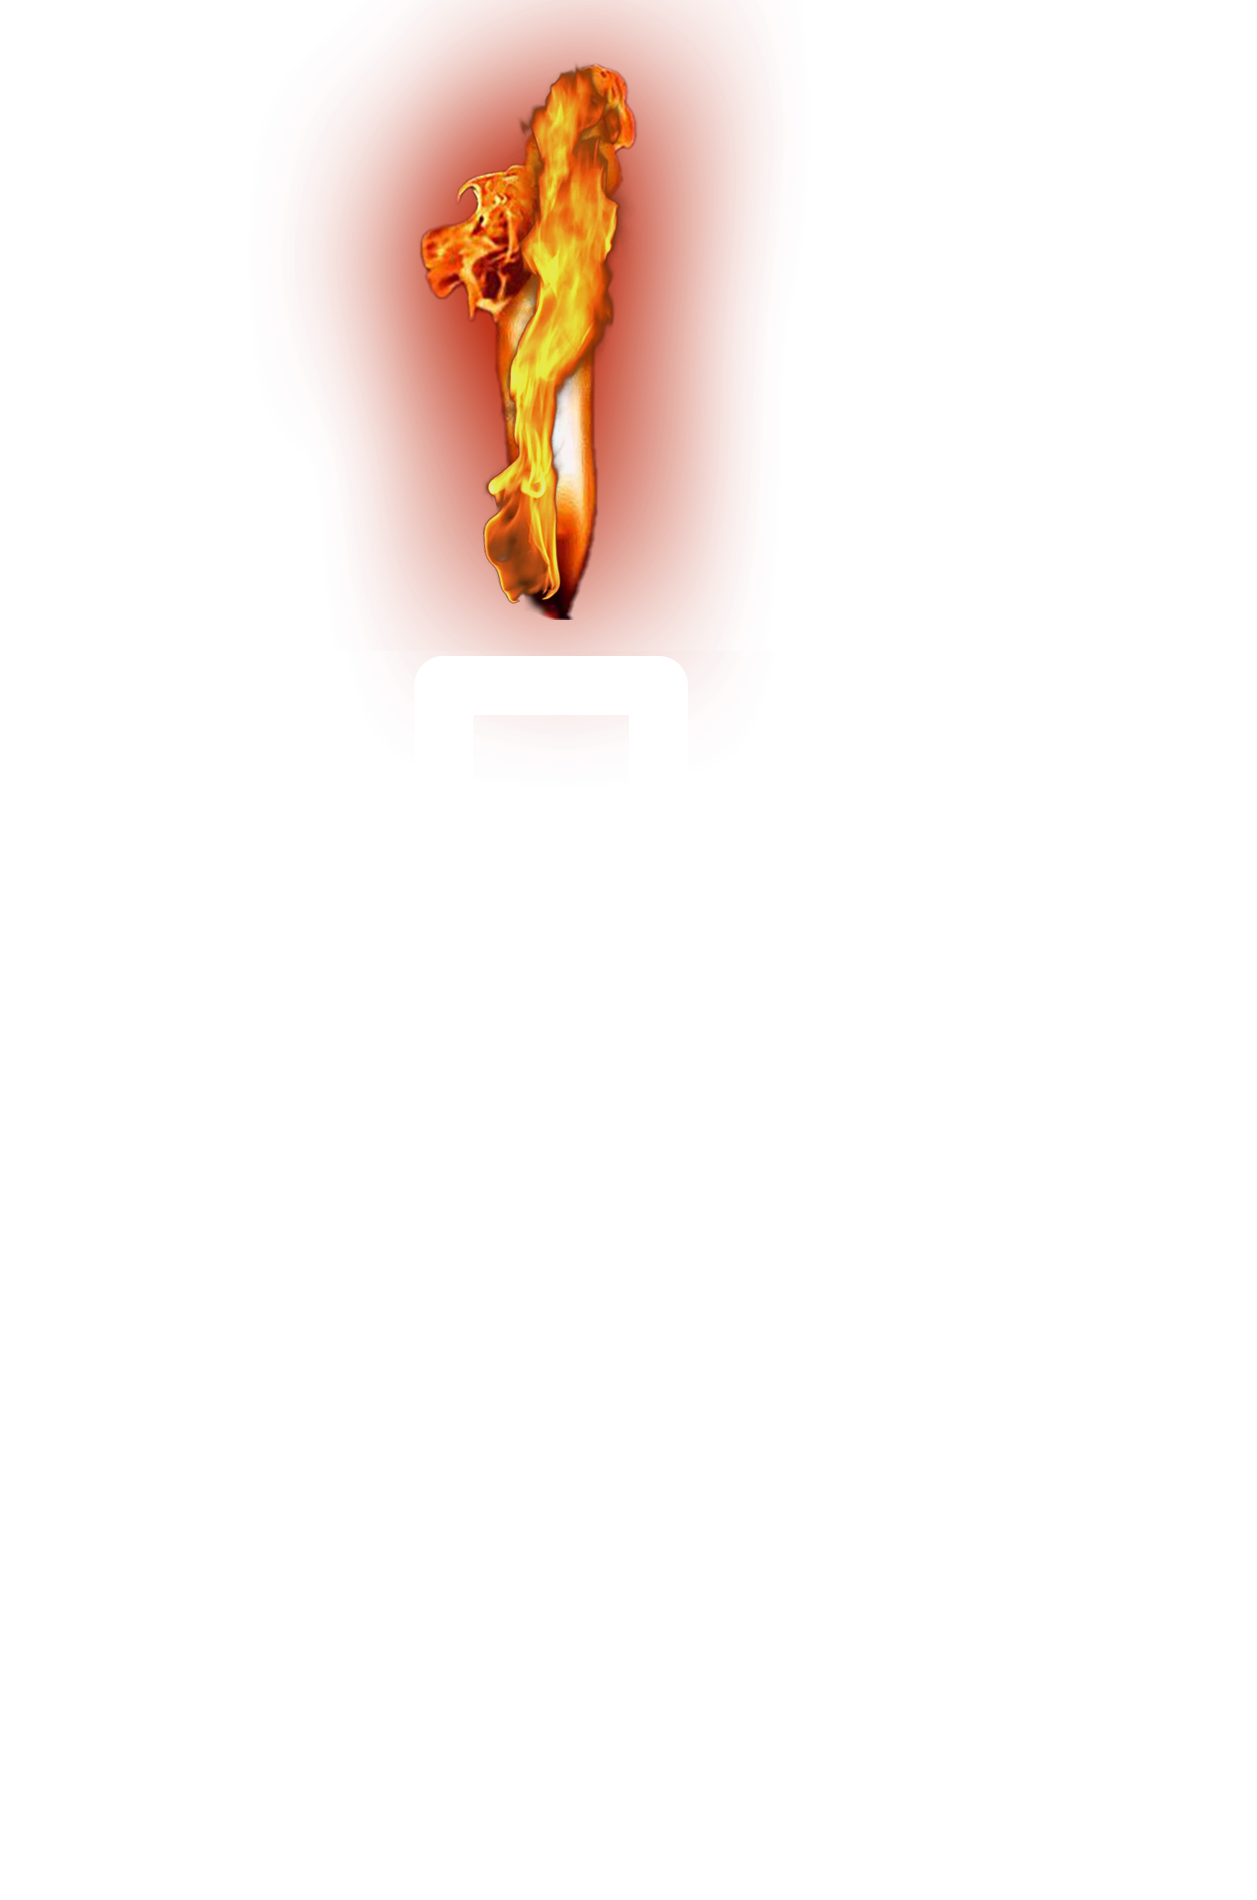 Icon of Bunsen burner with real flame